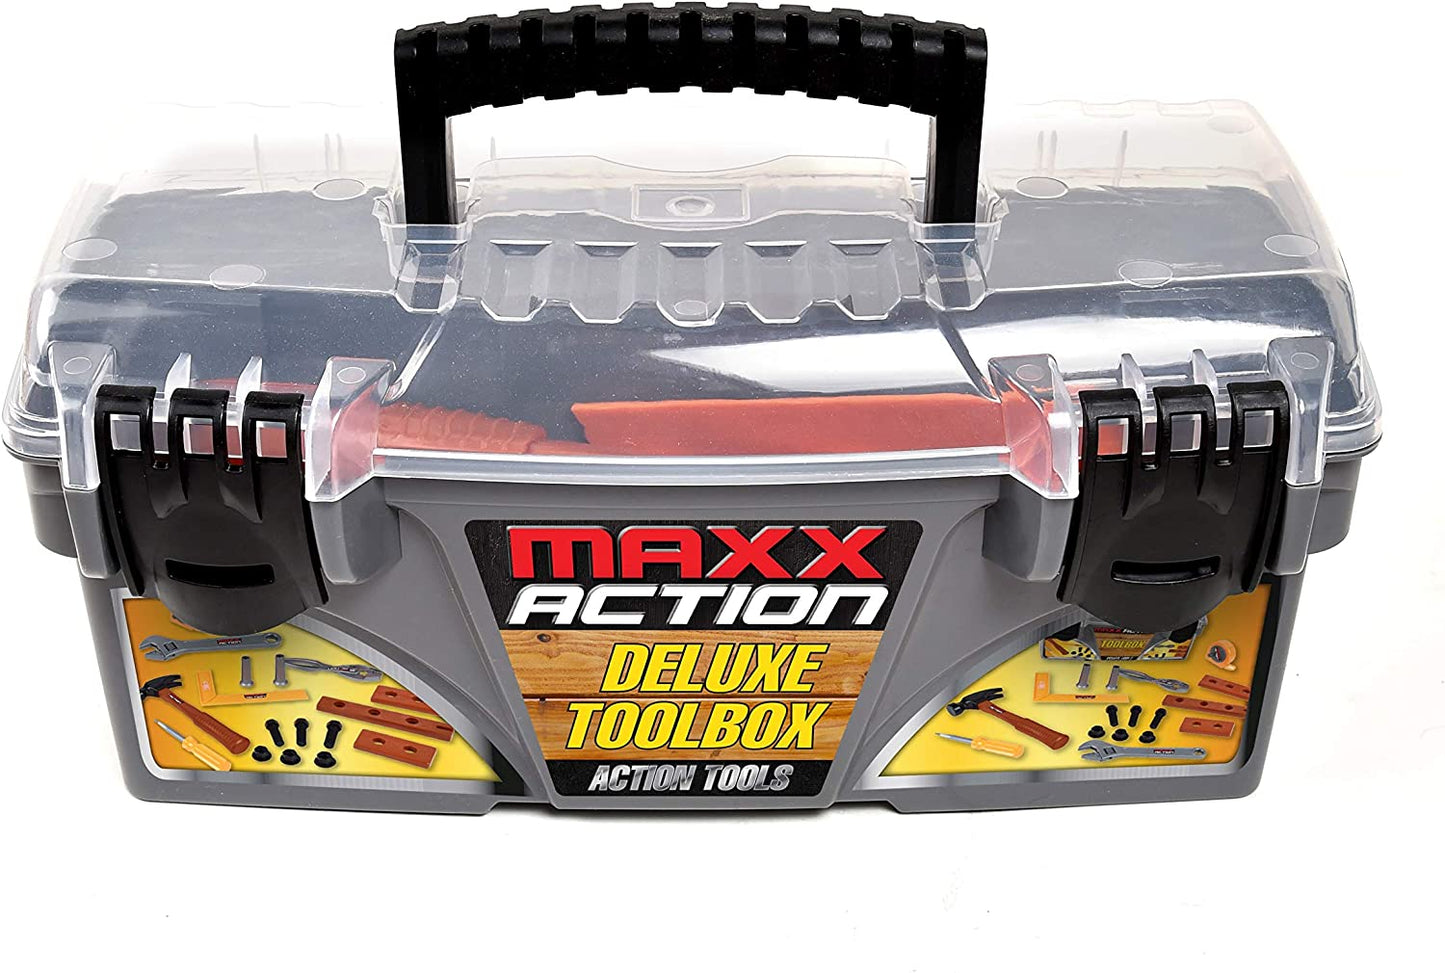 18 pc Deluxe Toolbox Action Tools